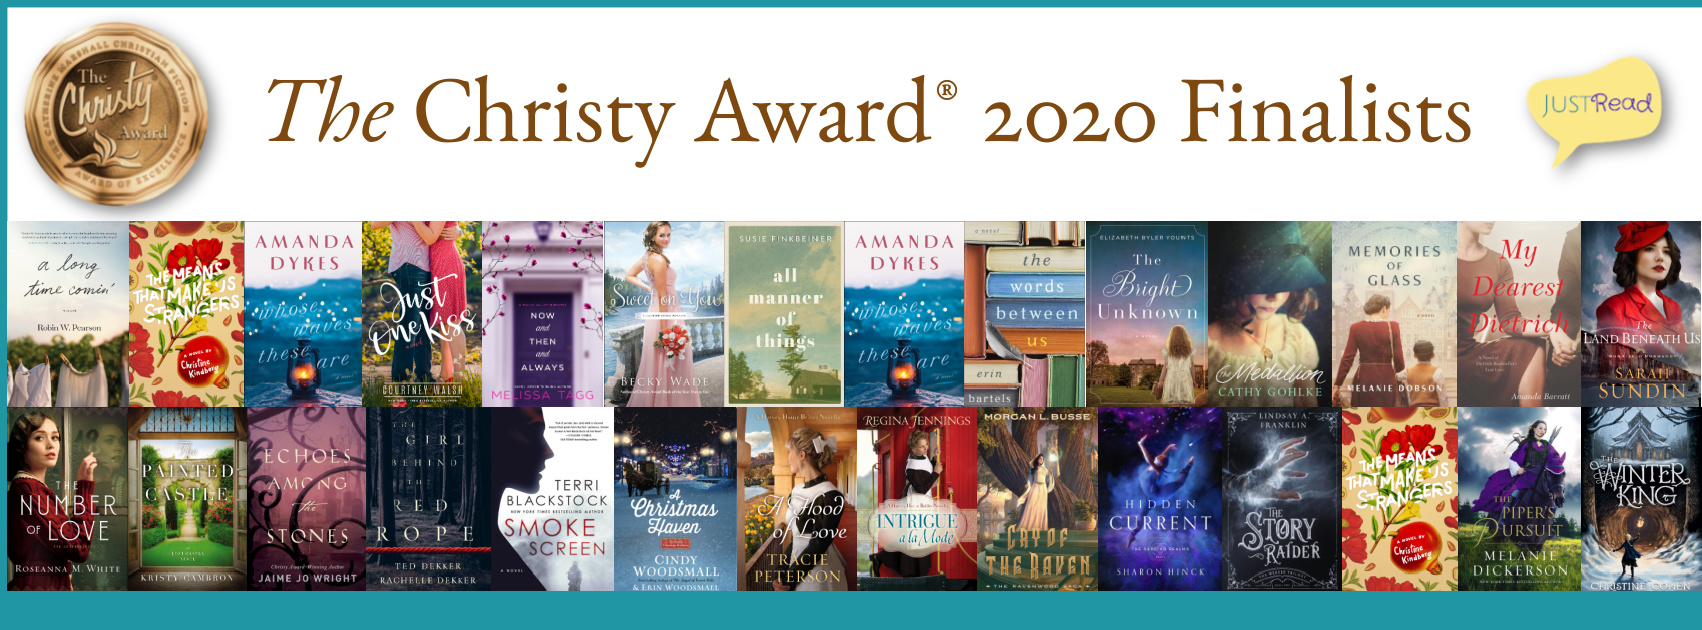 The Christy Award 2020 Finalists on JustRead